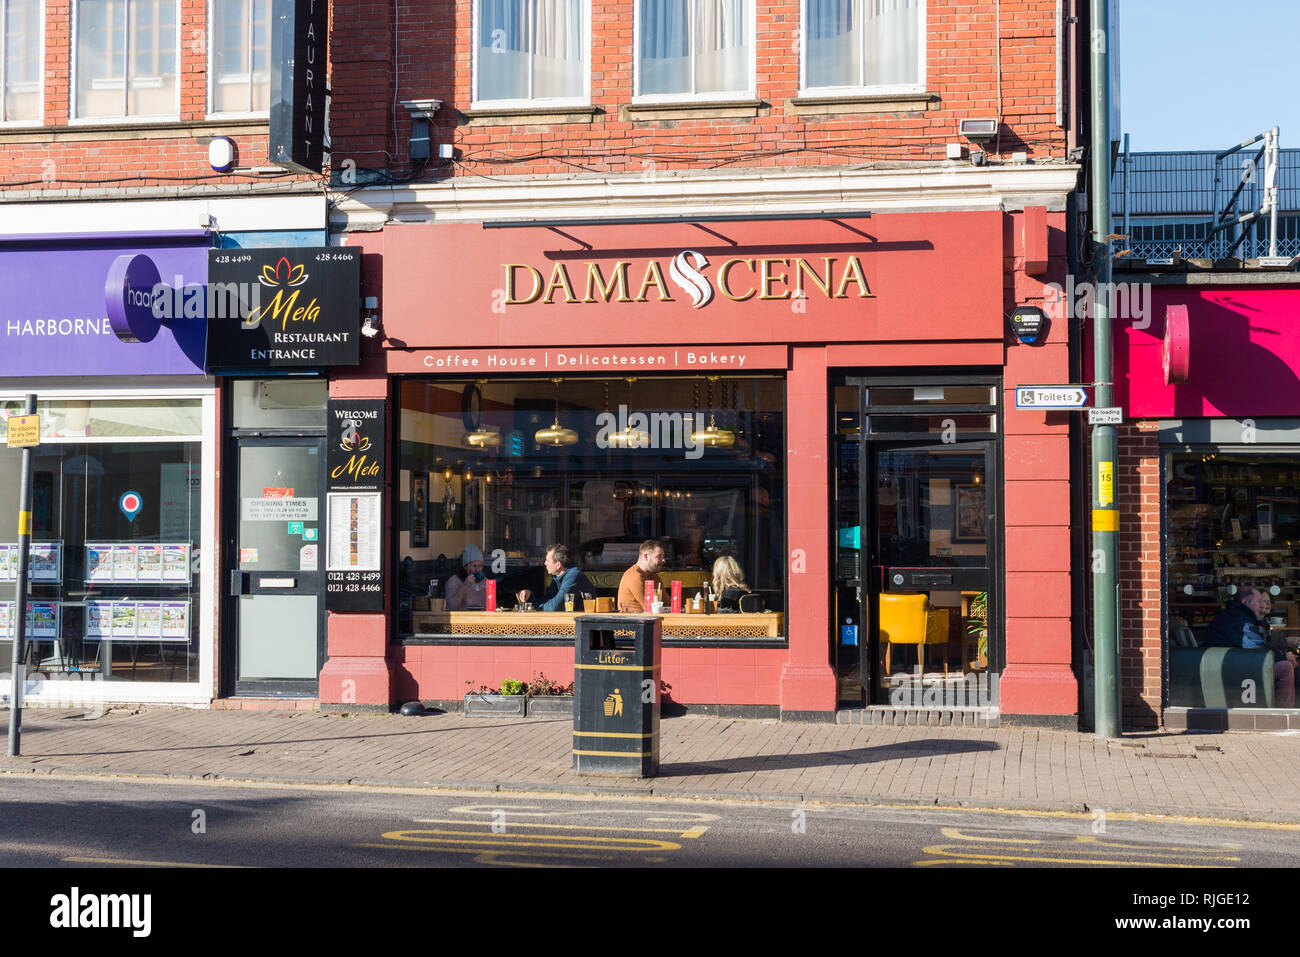 Damascena middle eastern cafe and coffee shop in Harborne High Street, Birmingham Stock Photo